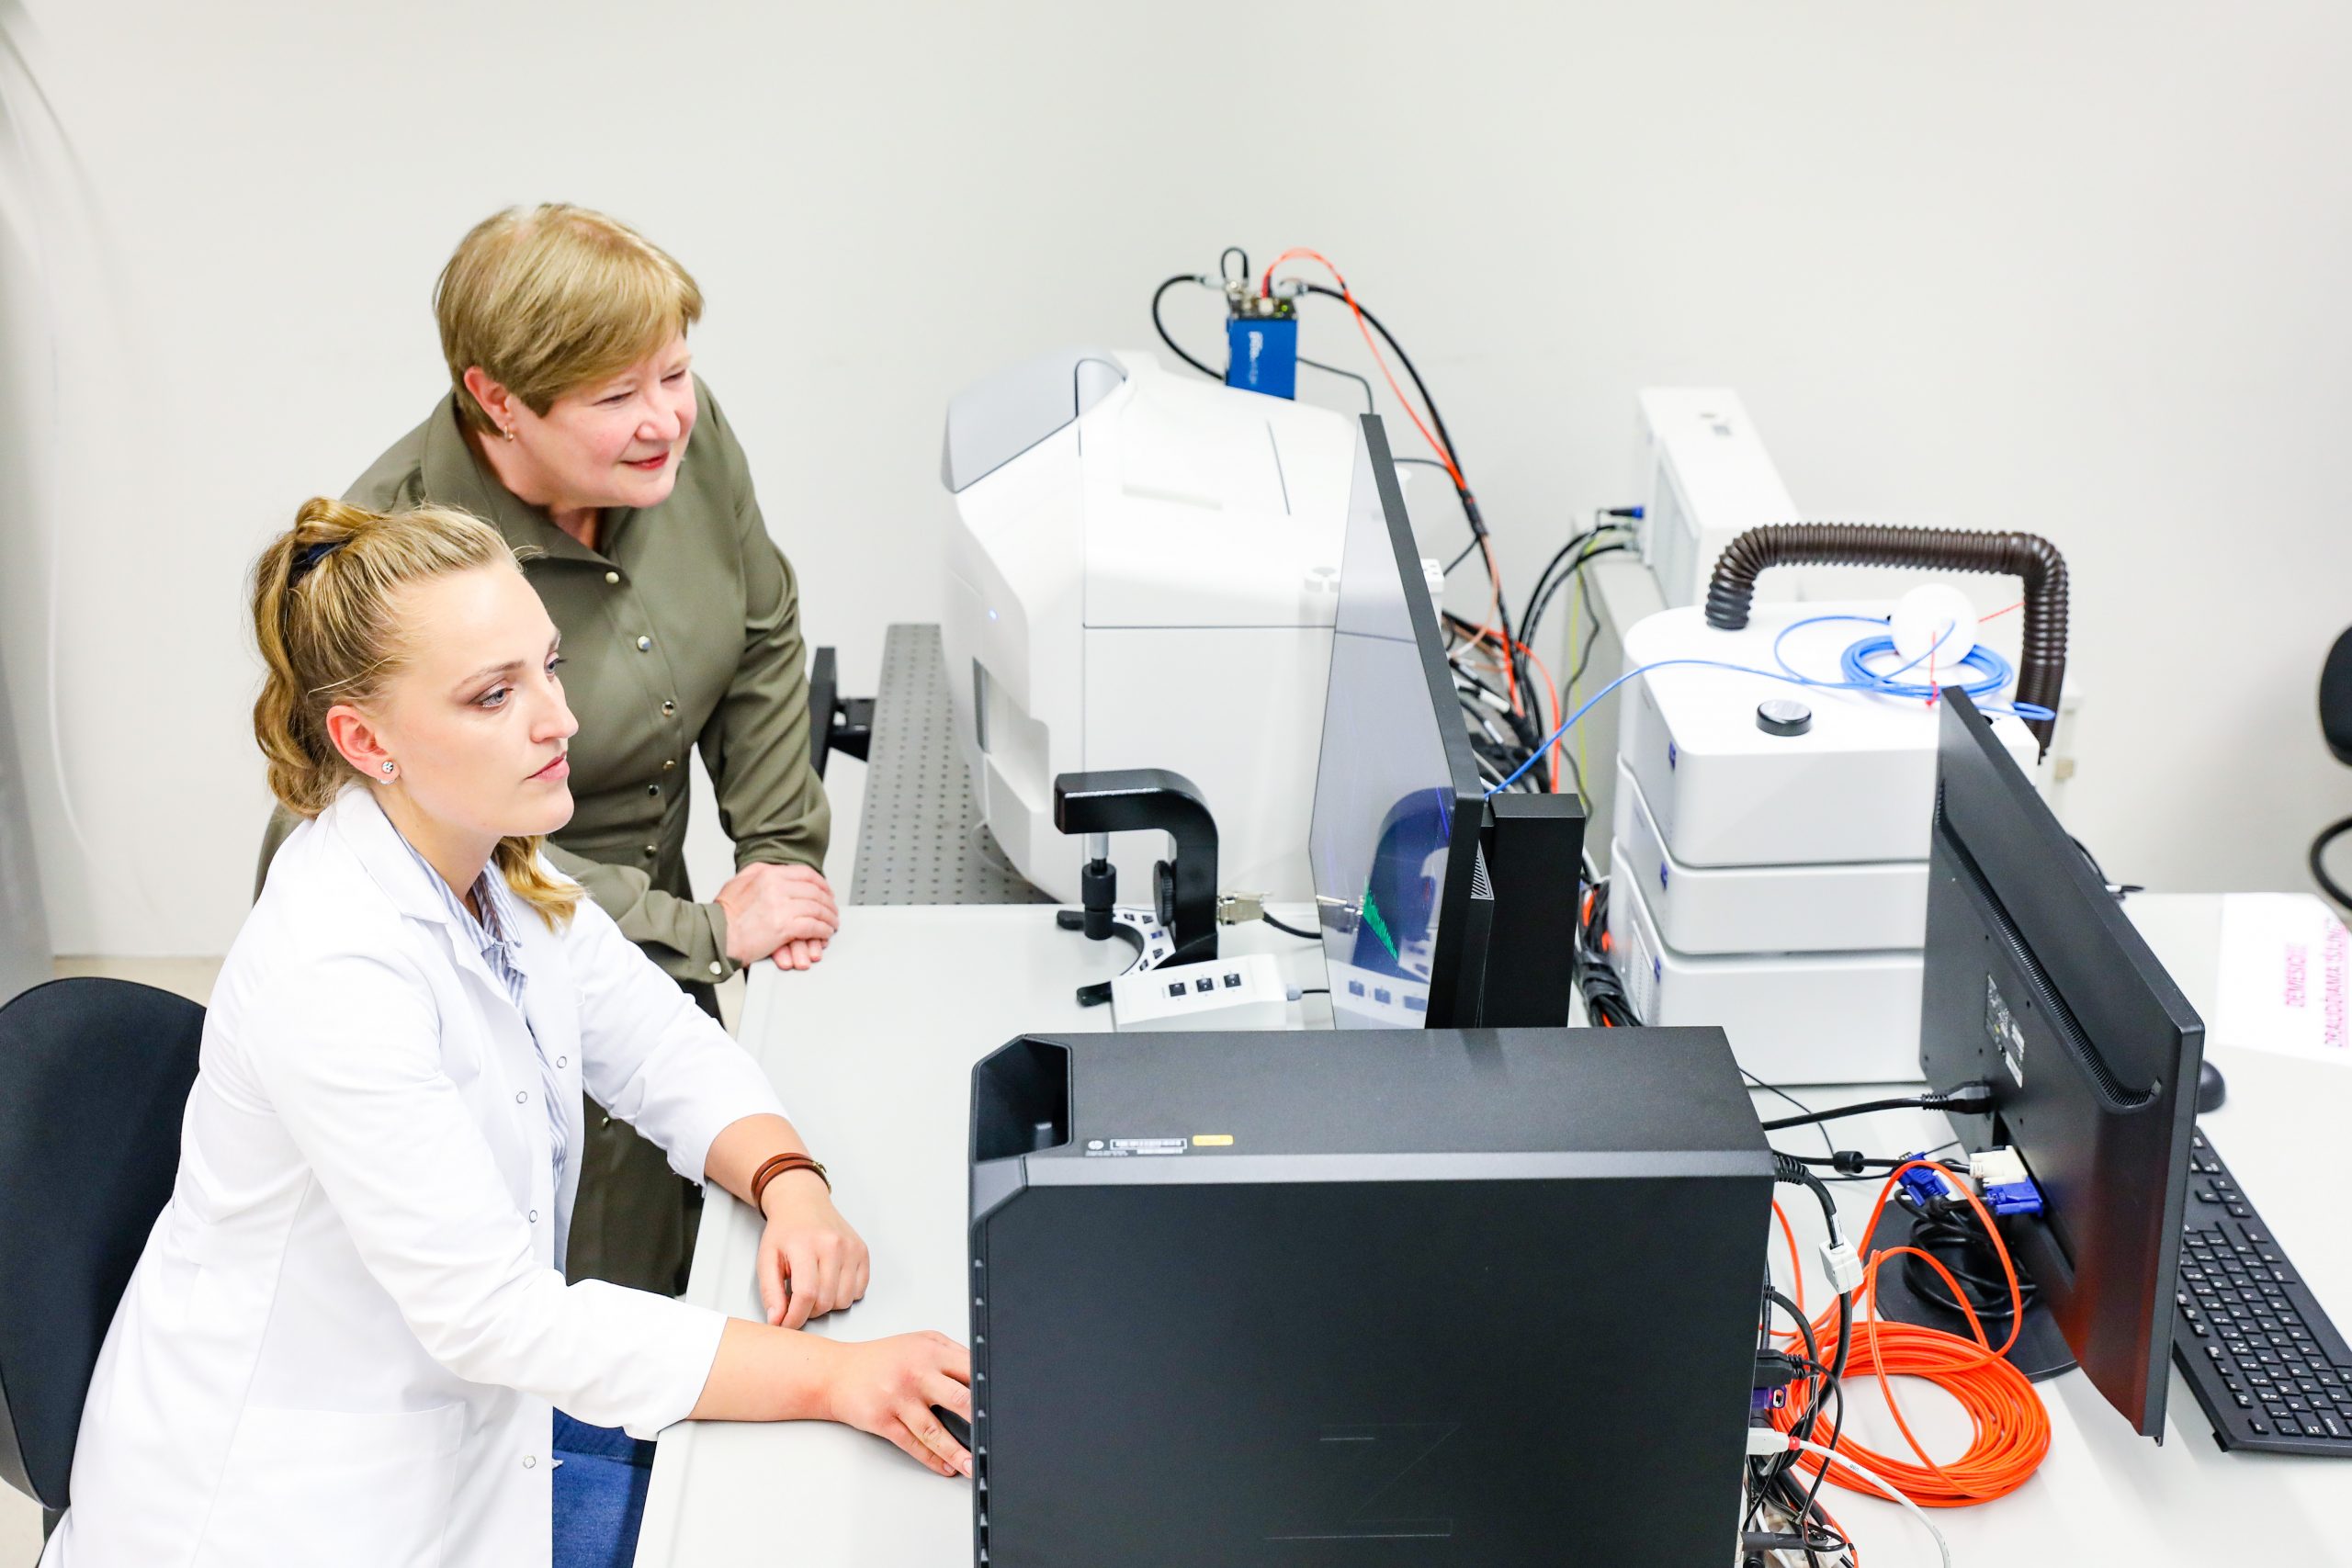 Carl Zeiss microscopes for education are now available in Latvia